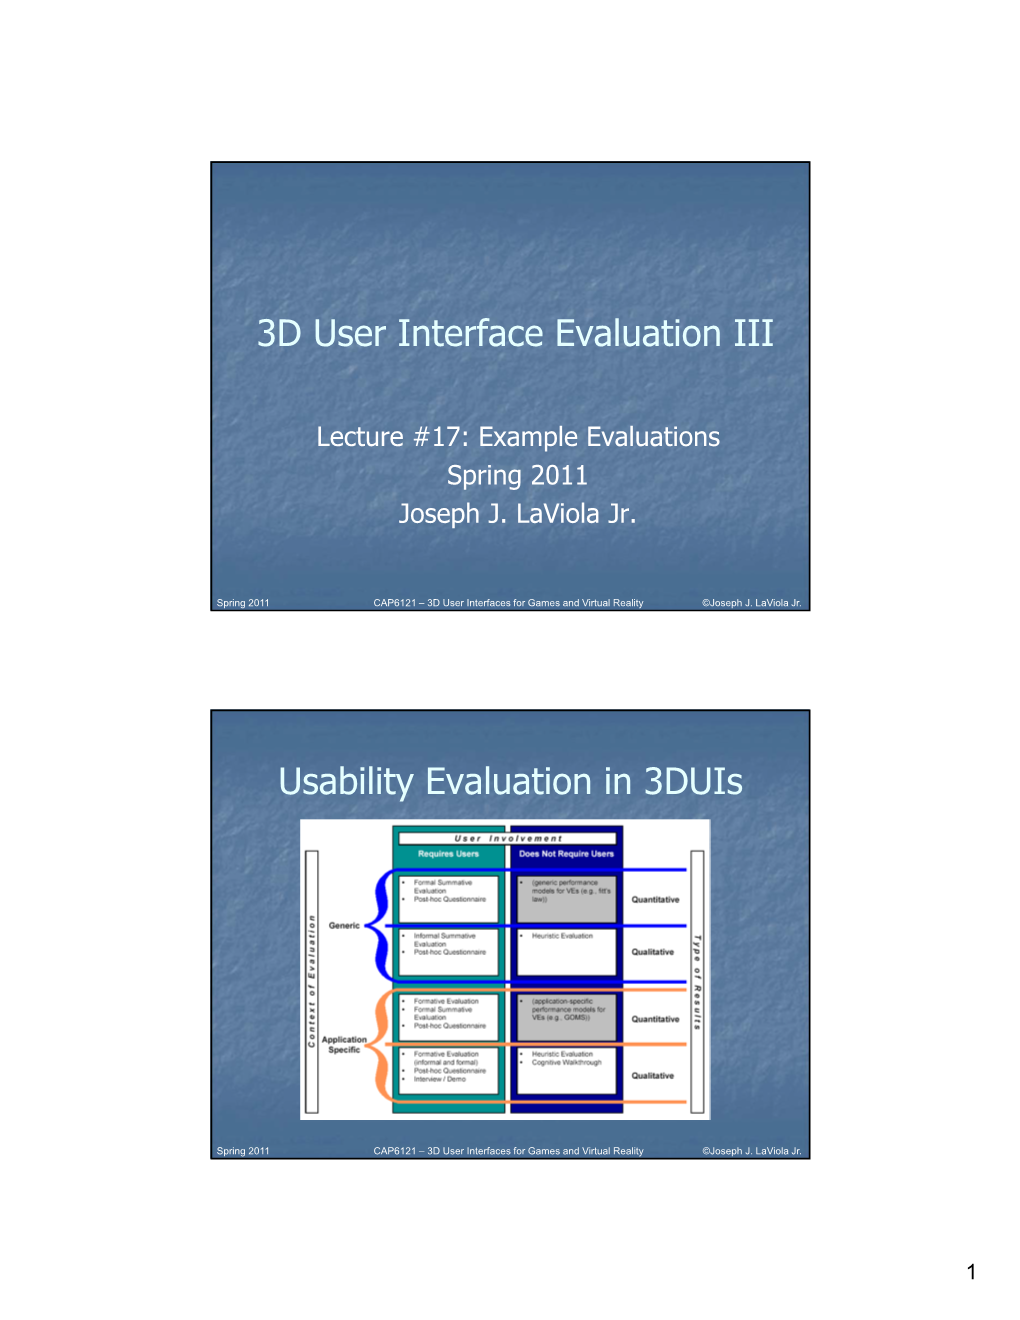 3D User Interface Evaluation III Usability Evaluation in 3Duis